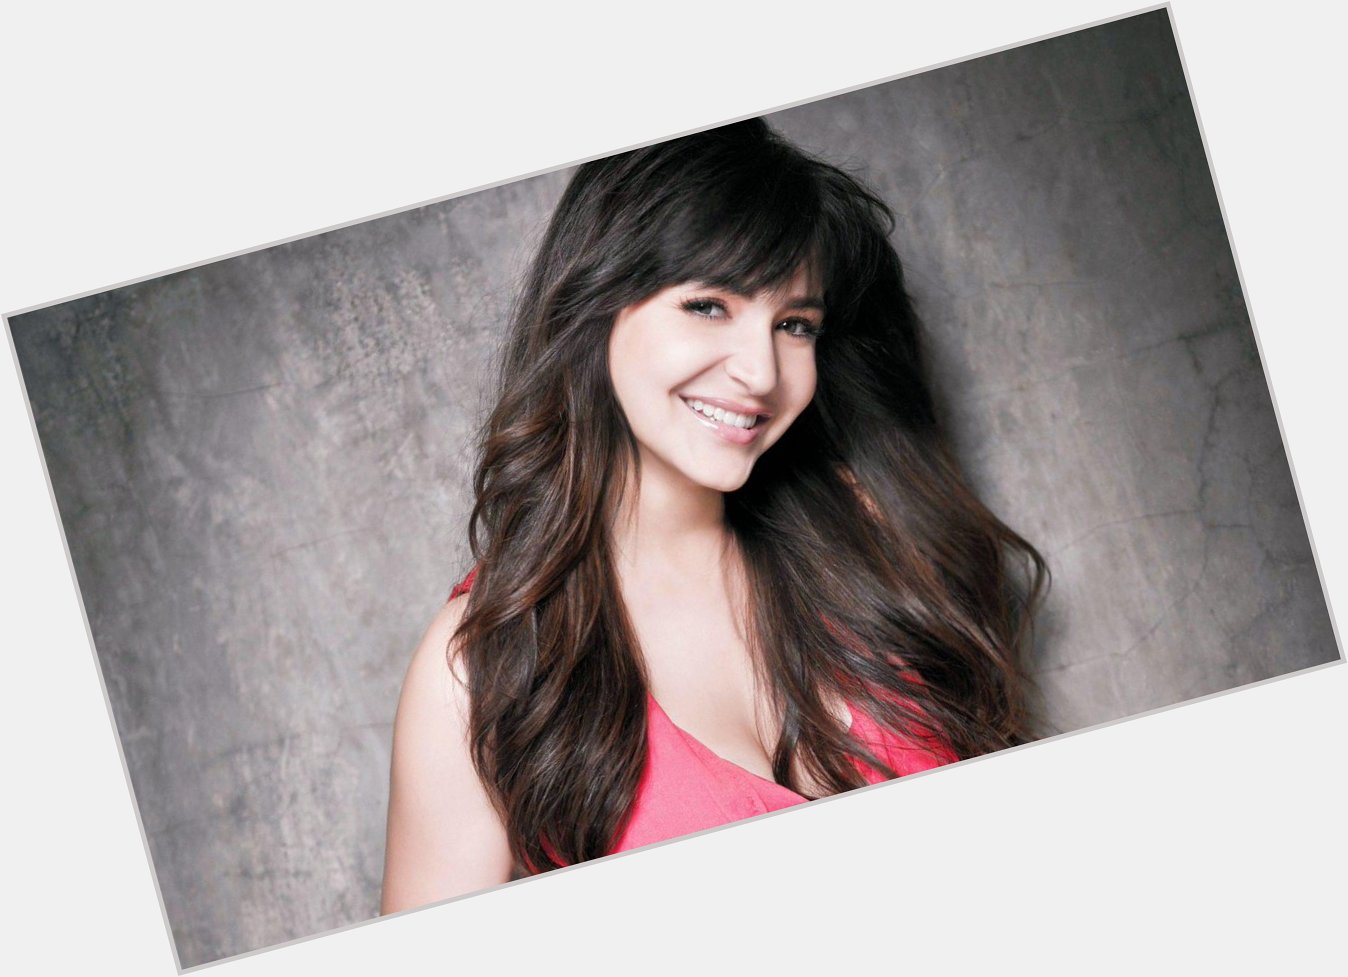 HAPPY BIRTHDAY ANUSHKA SHARMA! :D  We are really waiting to see you in 